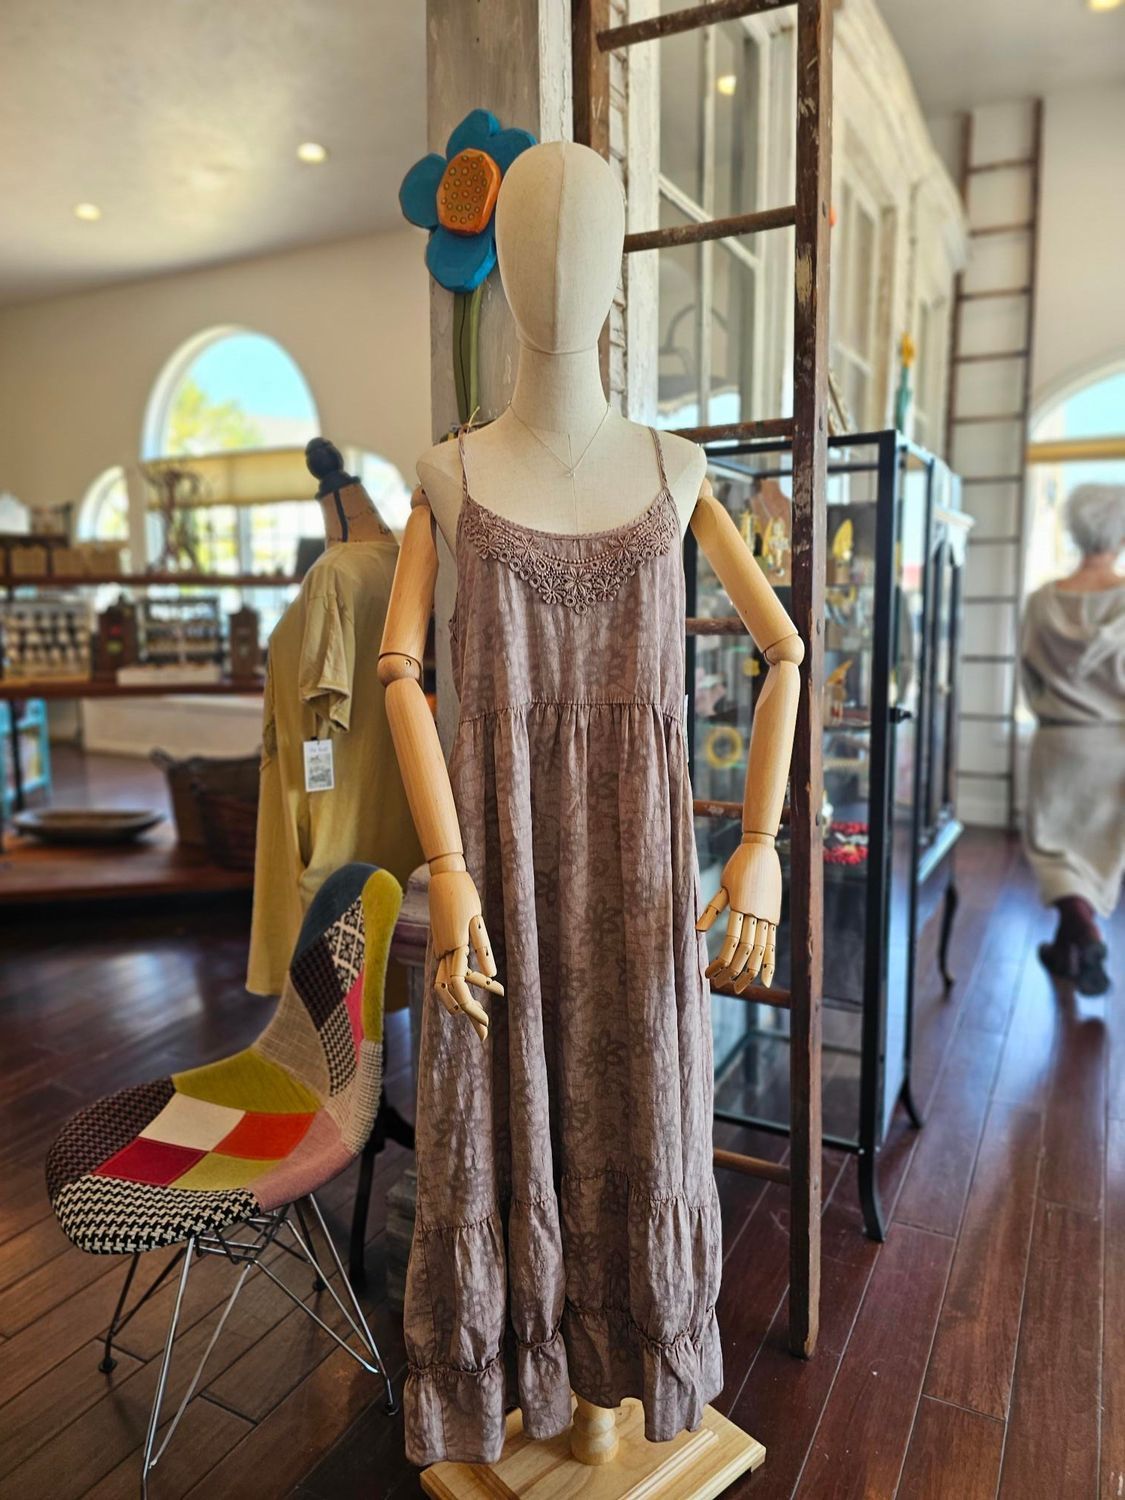 A mannequin is wearing a dress in a store.